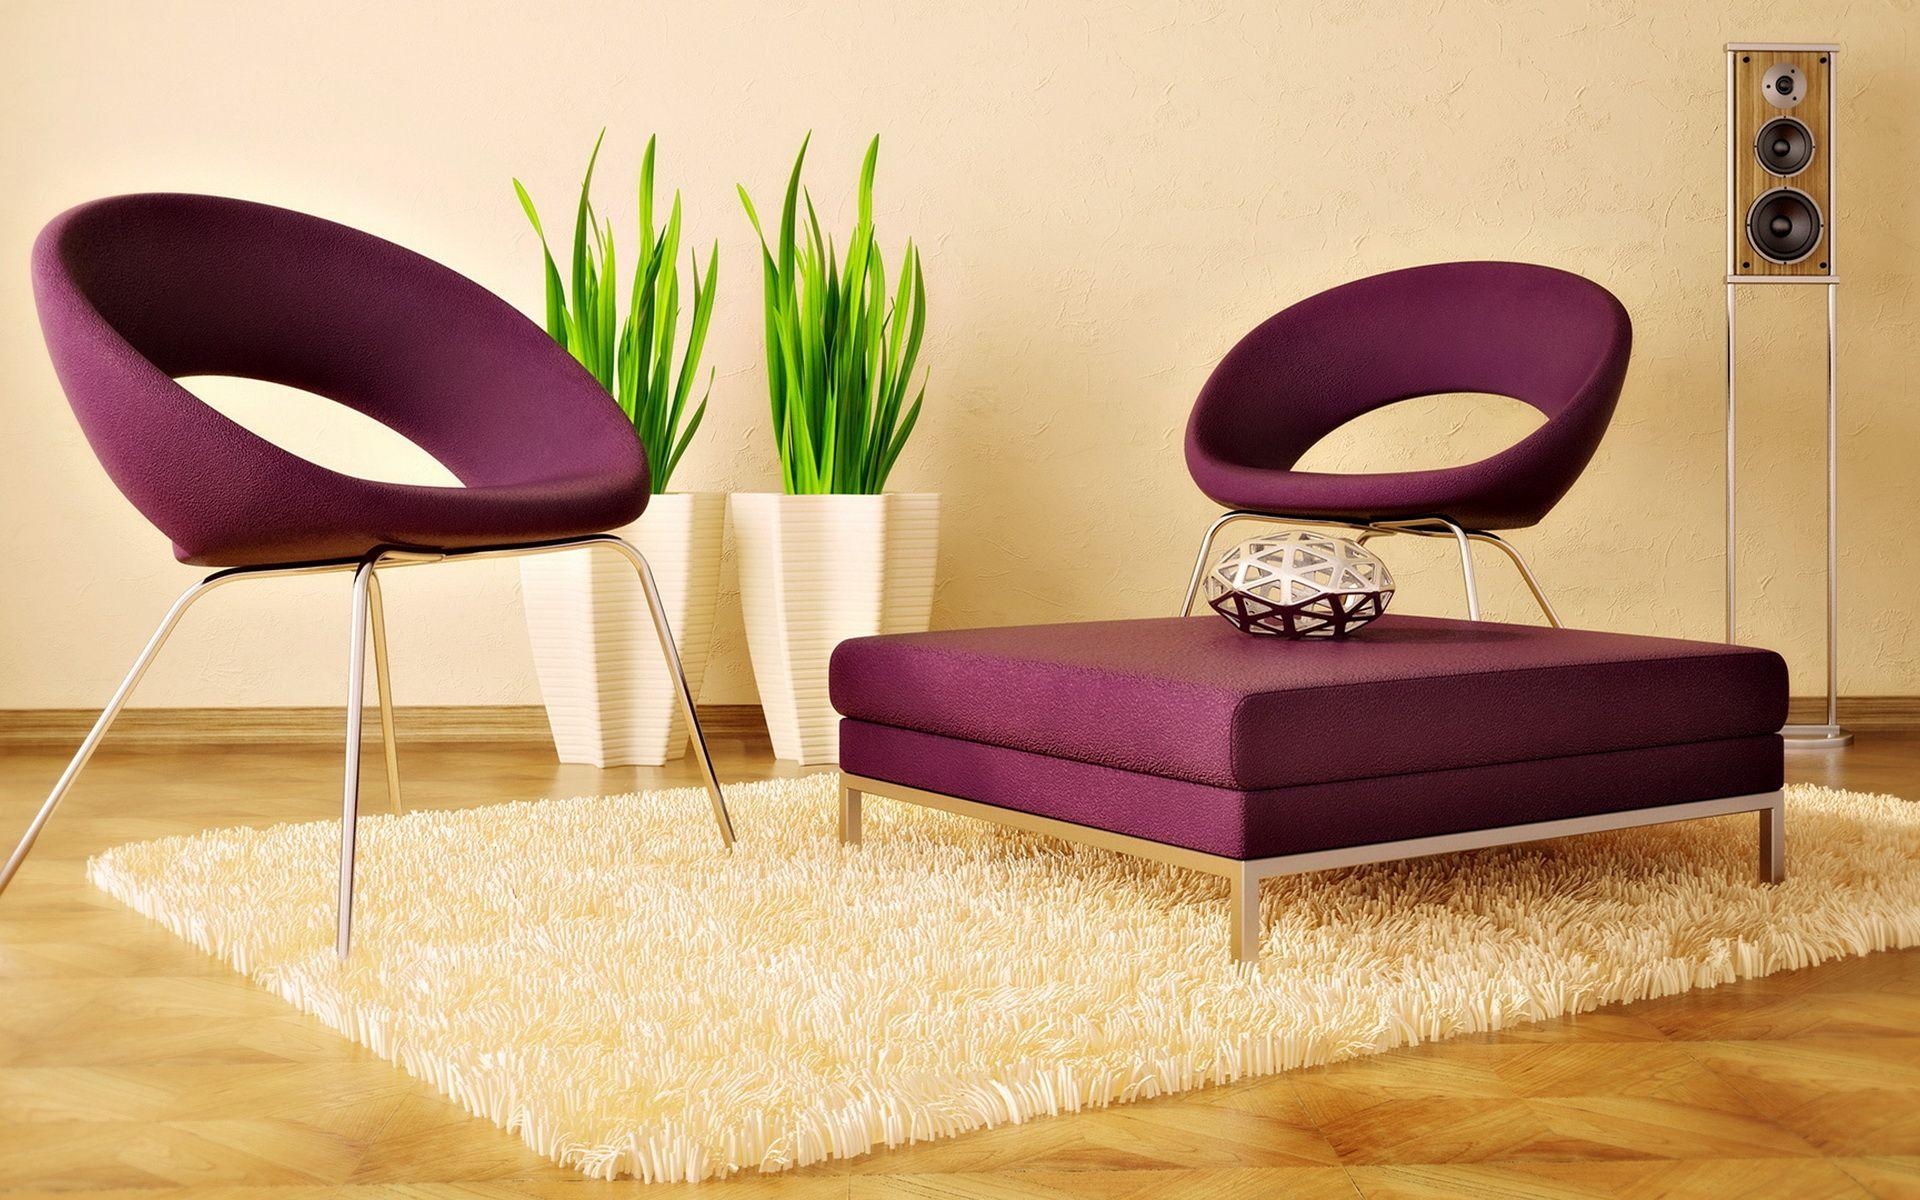 Designer chairs wallpaper and image, picture, photo